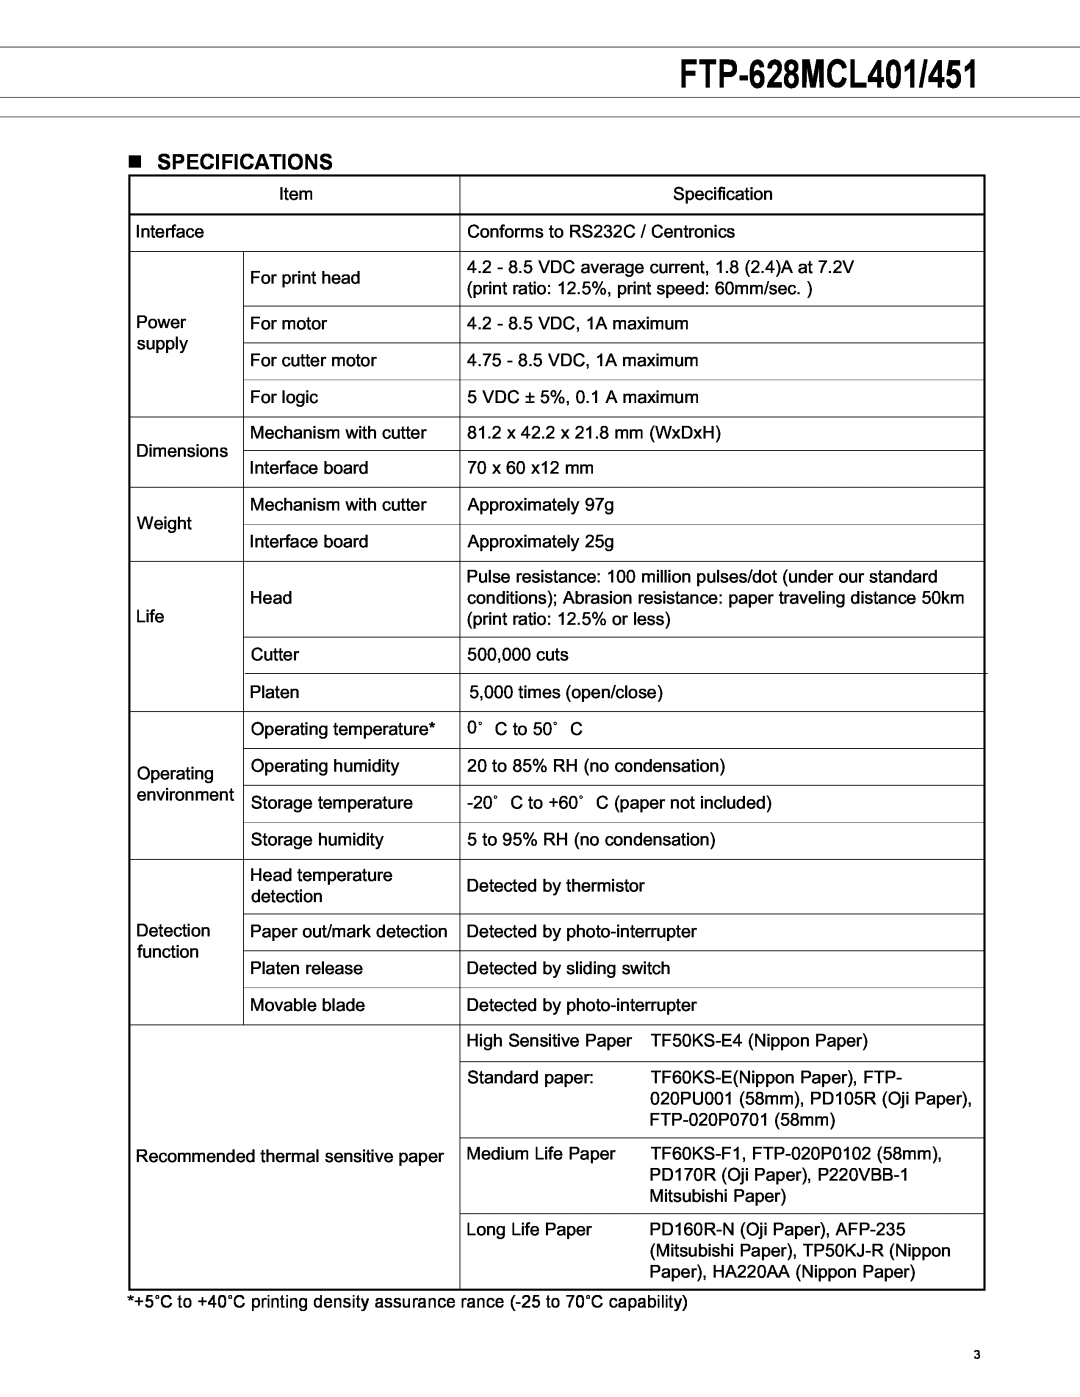 Fujitsu FTP-628MCL451 manual FTP-628MCL401/451, n SPECIFICATIONS 